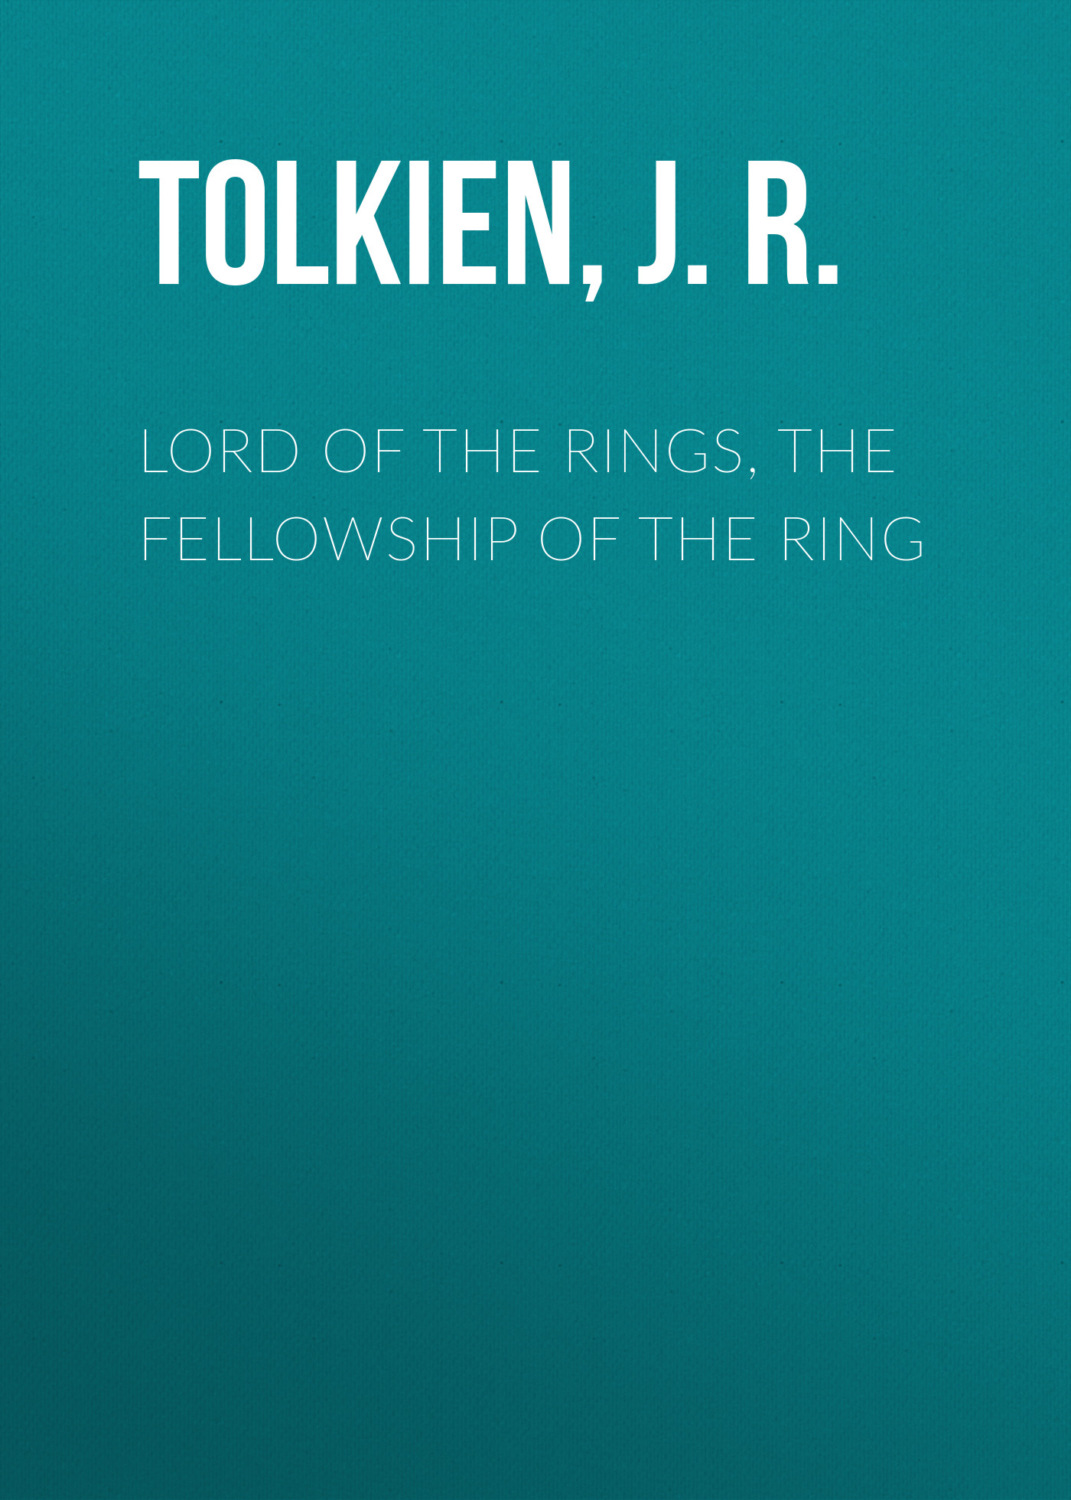 J.R.R. Tolkien Audiobook Lord of the Rings, The Fellowship of the Ring